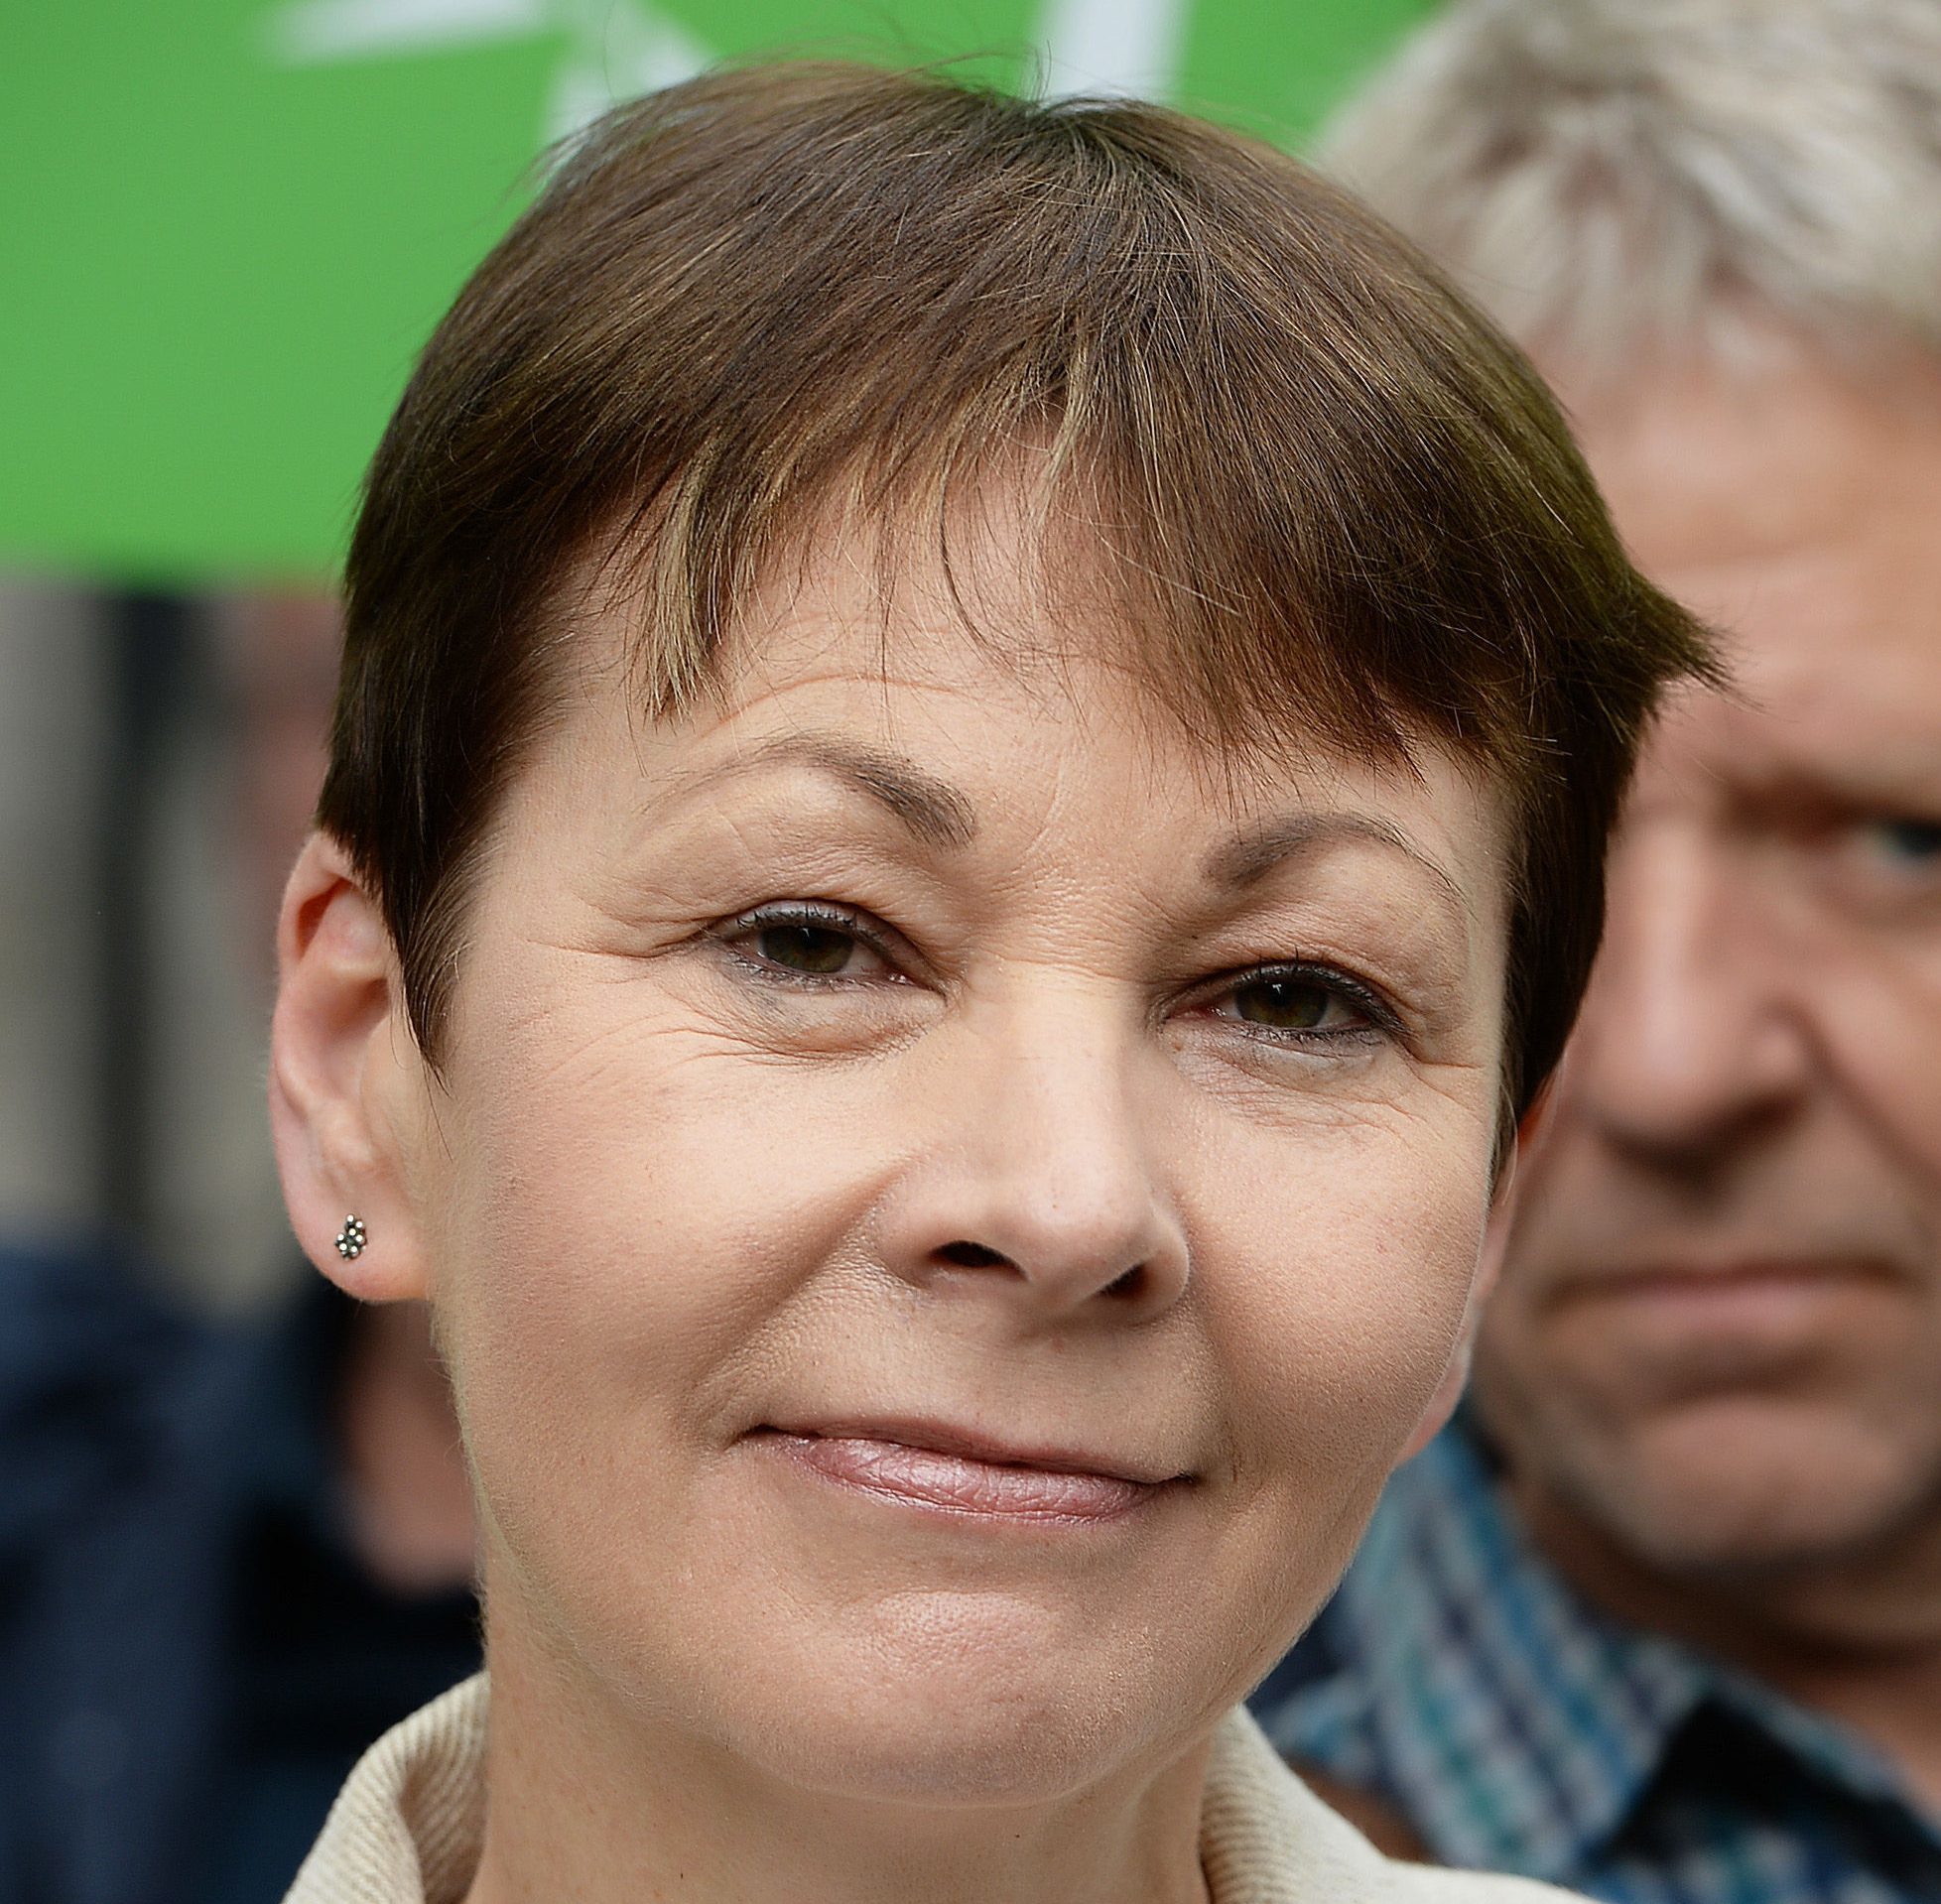 Green co-leader Caroline Lucas, who has warned that ending free movement of people after Brexit will create a "very real risk" to public services. (John Stillwell/PA Wire)